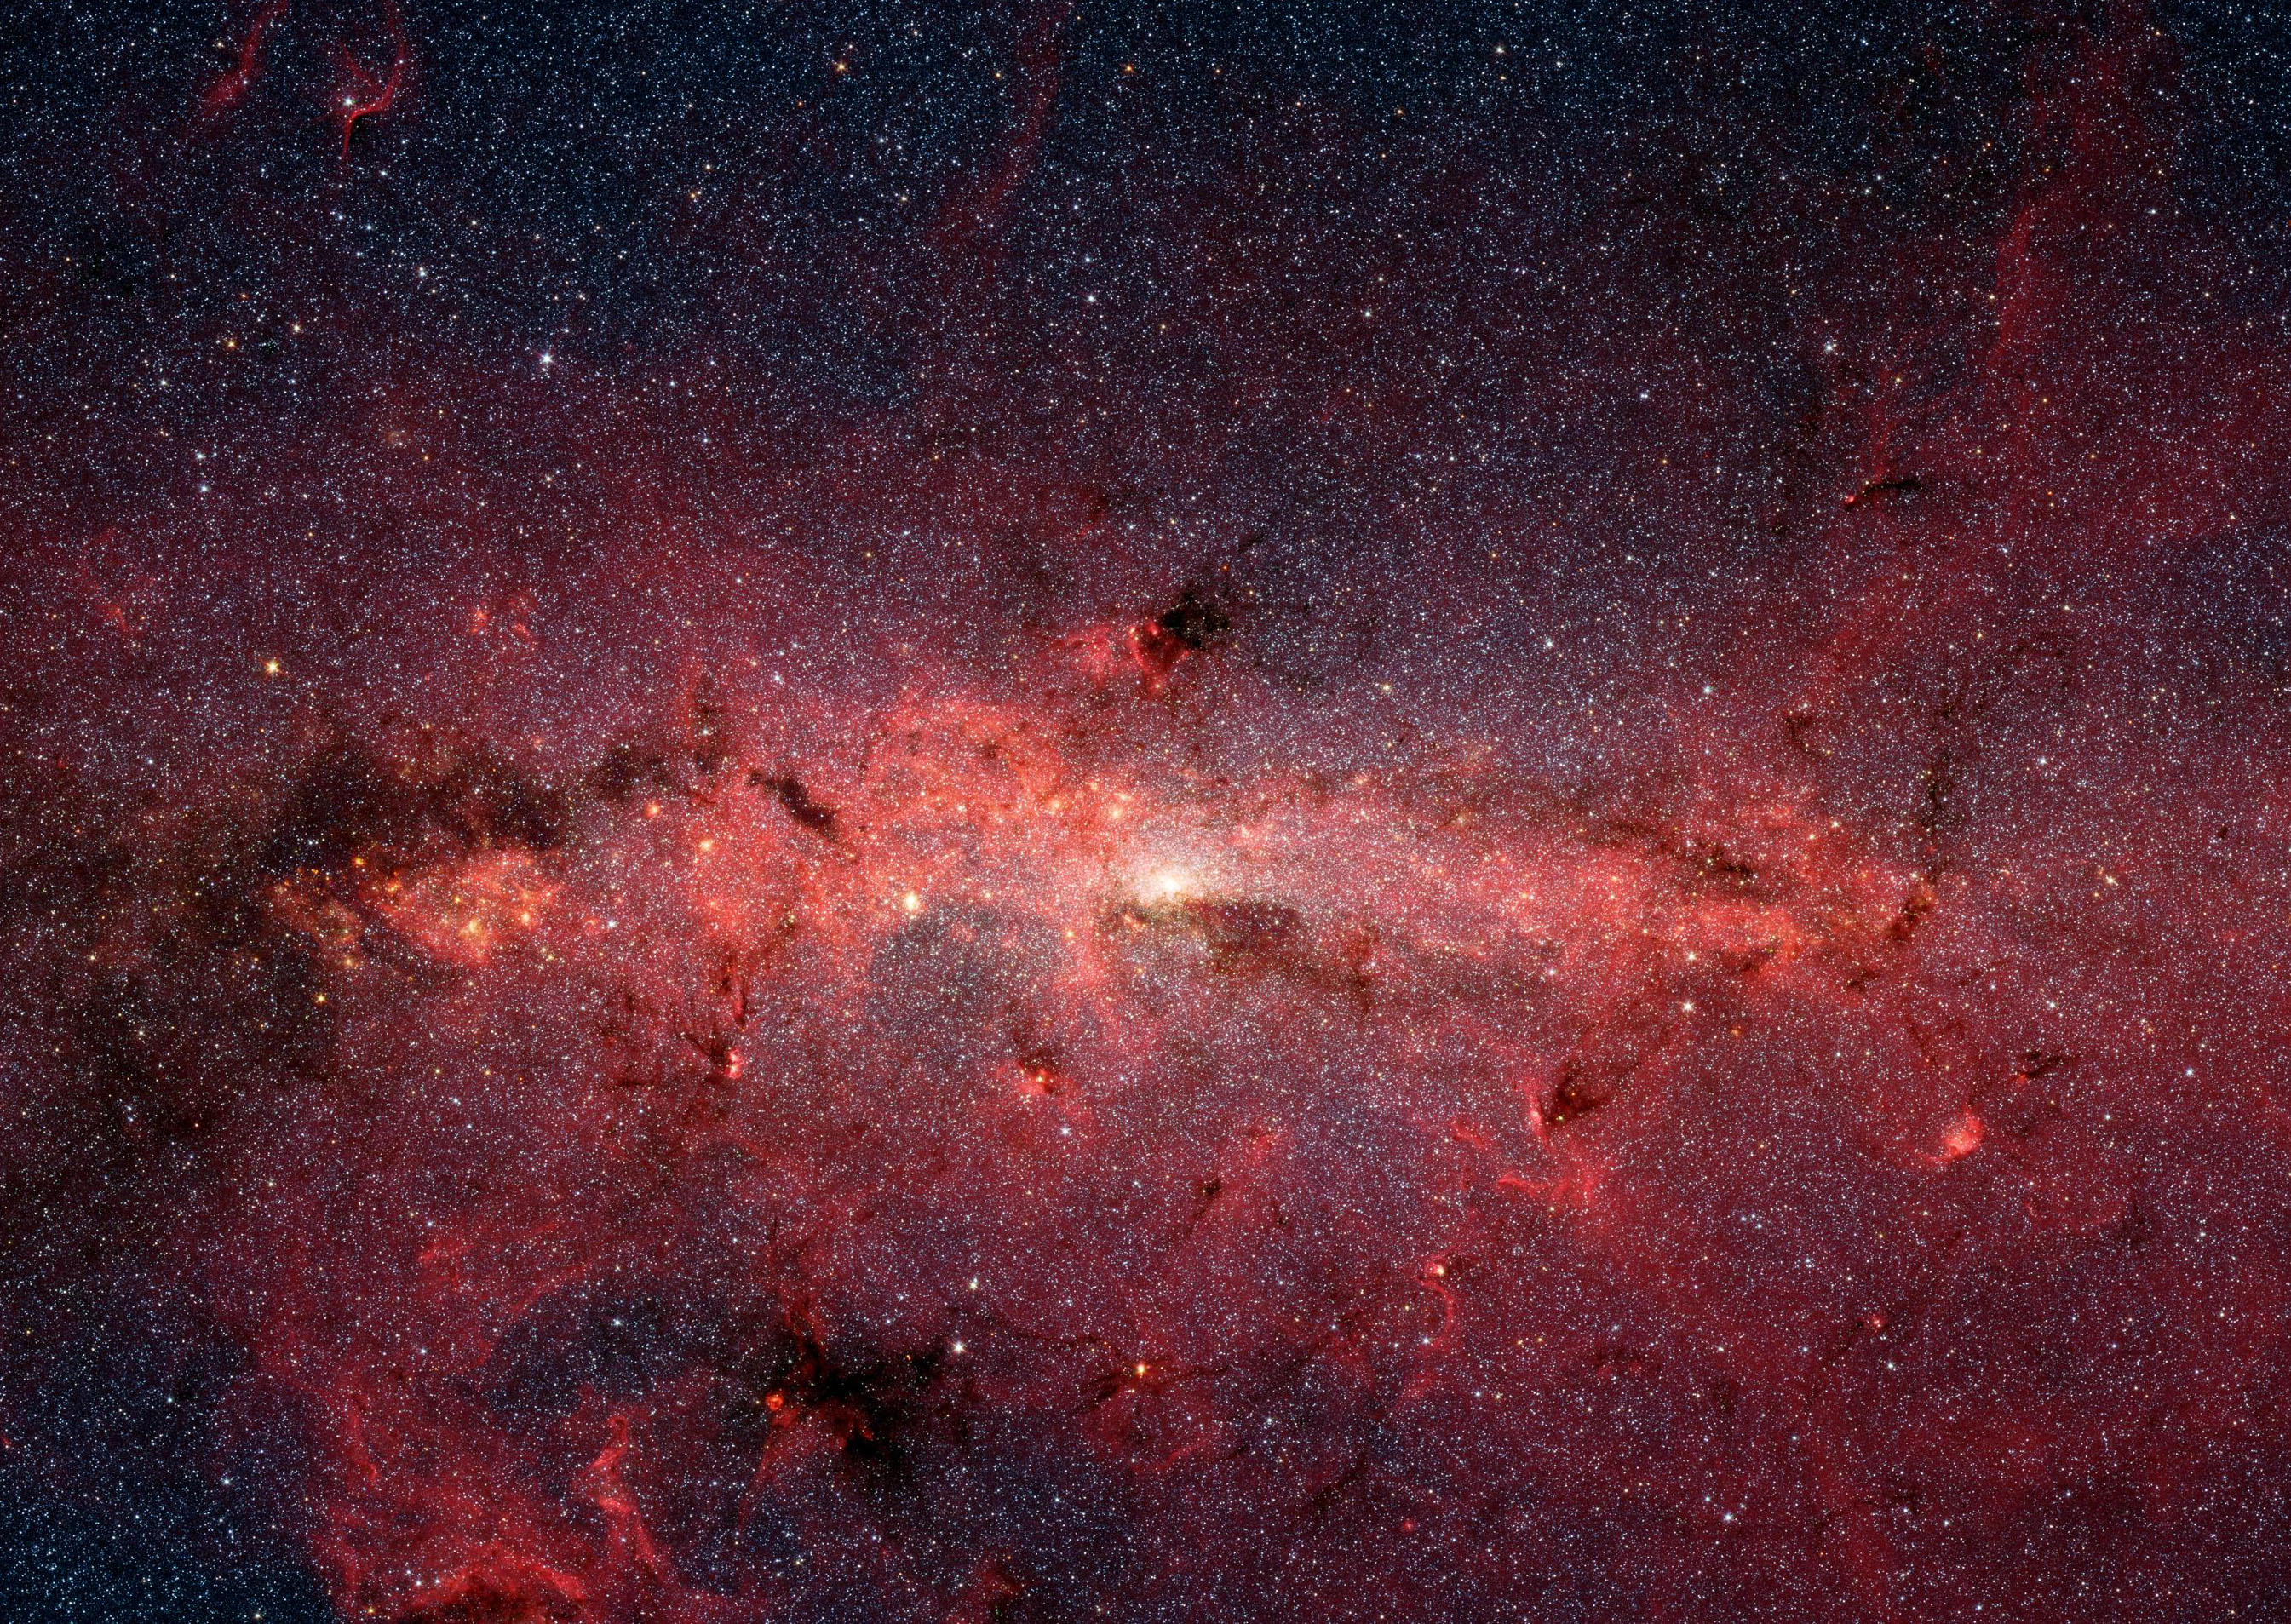 This image of the central region of the Milky Way shows a bright white glow at the center. An irregular line of light pink clouds stretches across the center of the image. Clouds in darker shades of pink and red spread out from that line, with more appearing at the bottom of the image than the top. Seemingly overlaid on these pink clouds are several dark maroon patches of different sizes. The background is studded with tiny white dots which are just some of the stars found in our galaxy. 